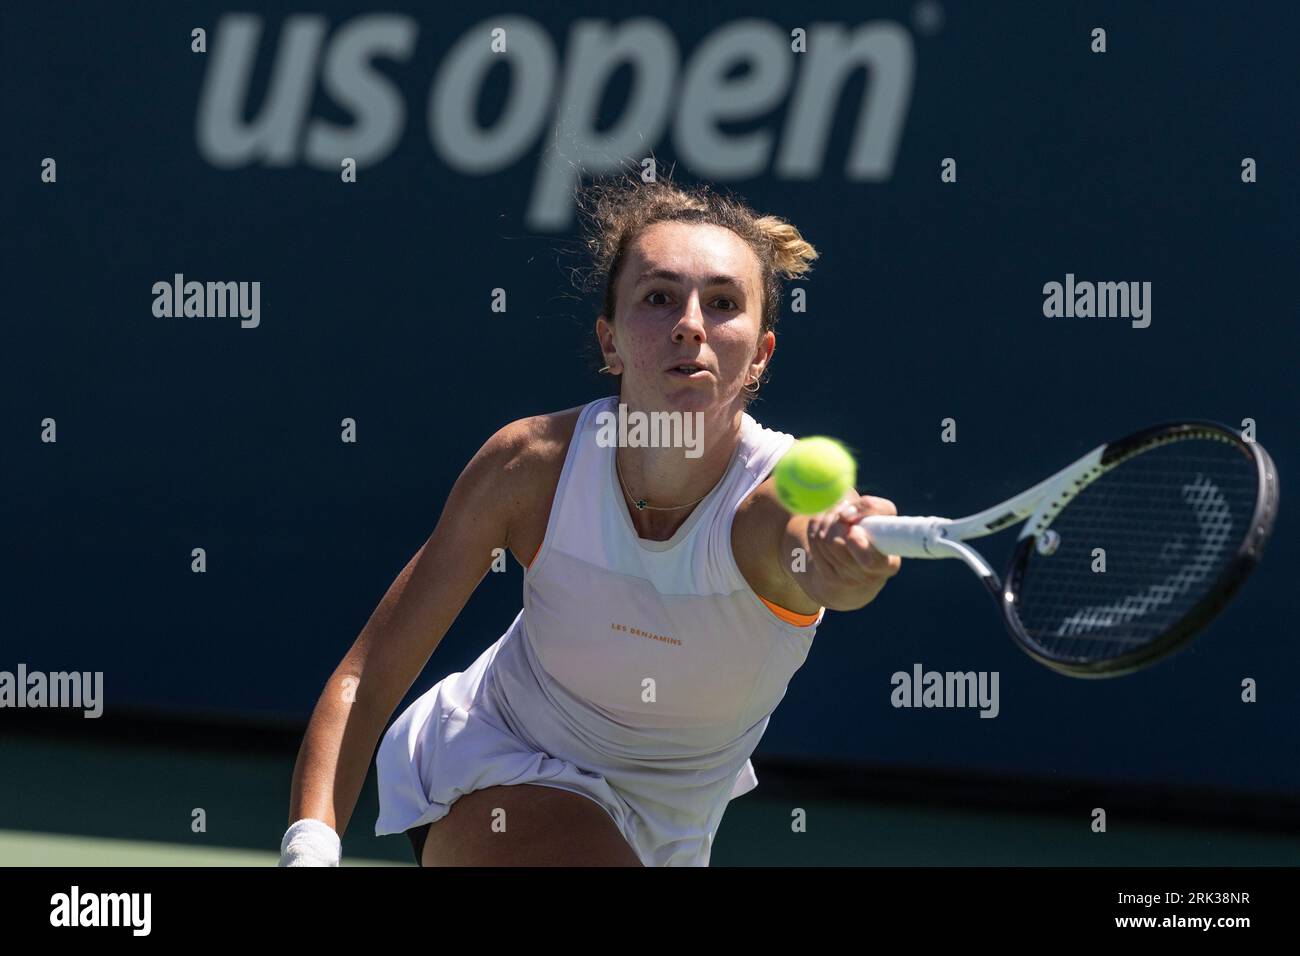 Ipek Oz of Turkiye returns ball during 1st round match against Emiliana Arango of Colombia of qualifying for US Open Championship at Billy Jean King Tennis Center in New York on August